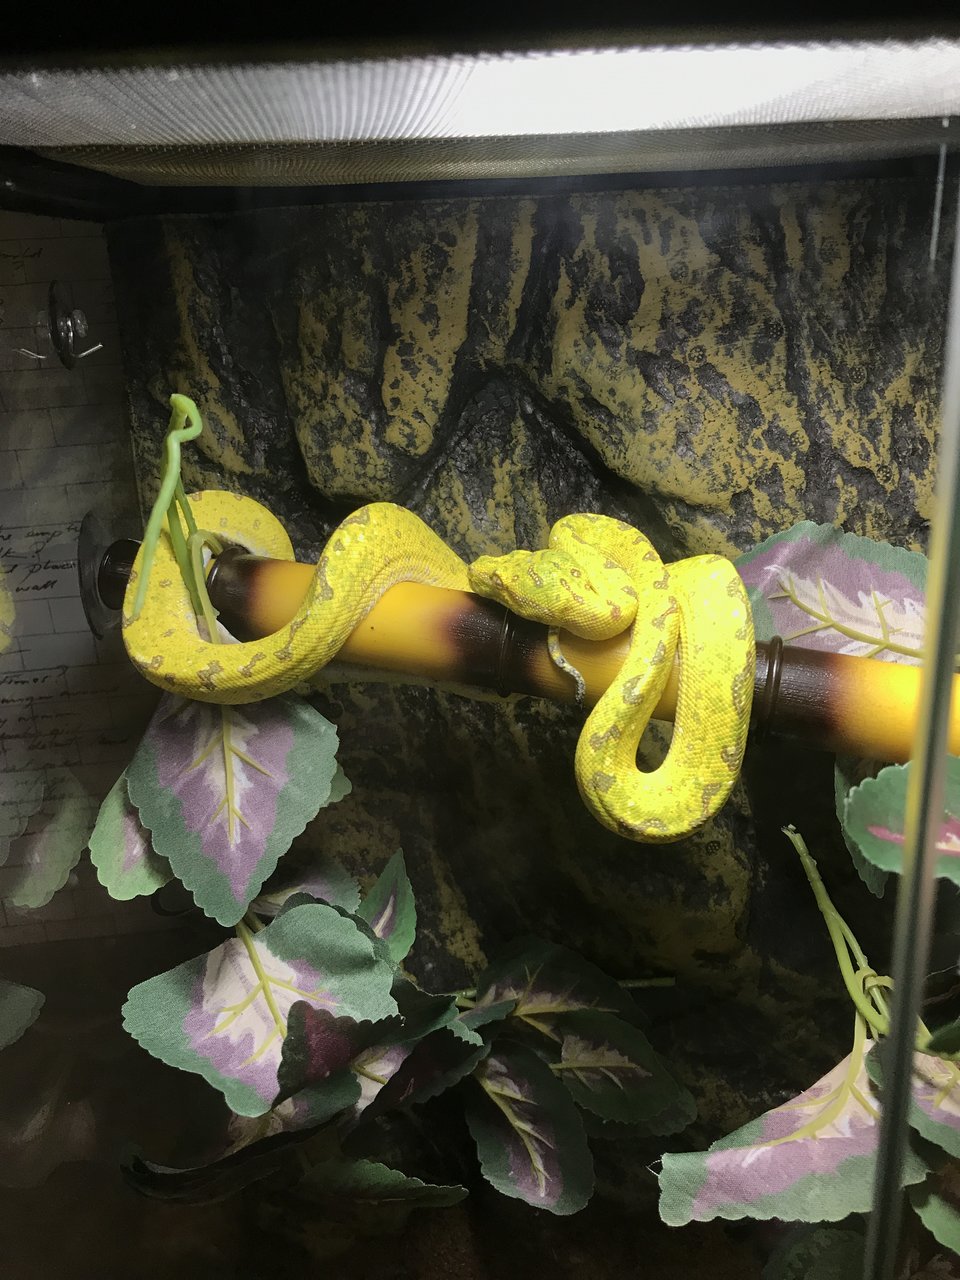 GTP stretched out